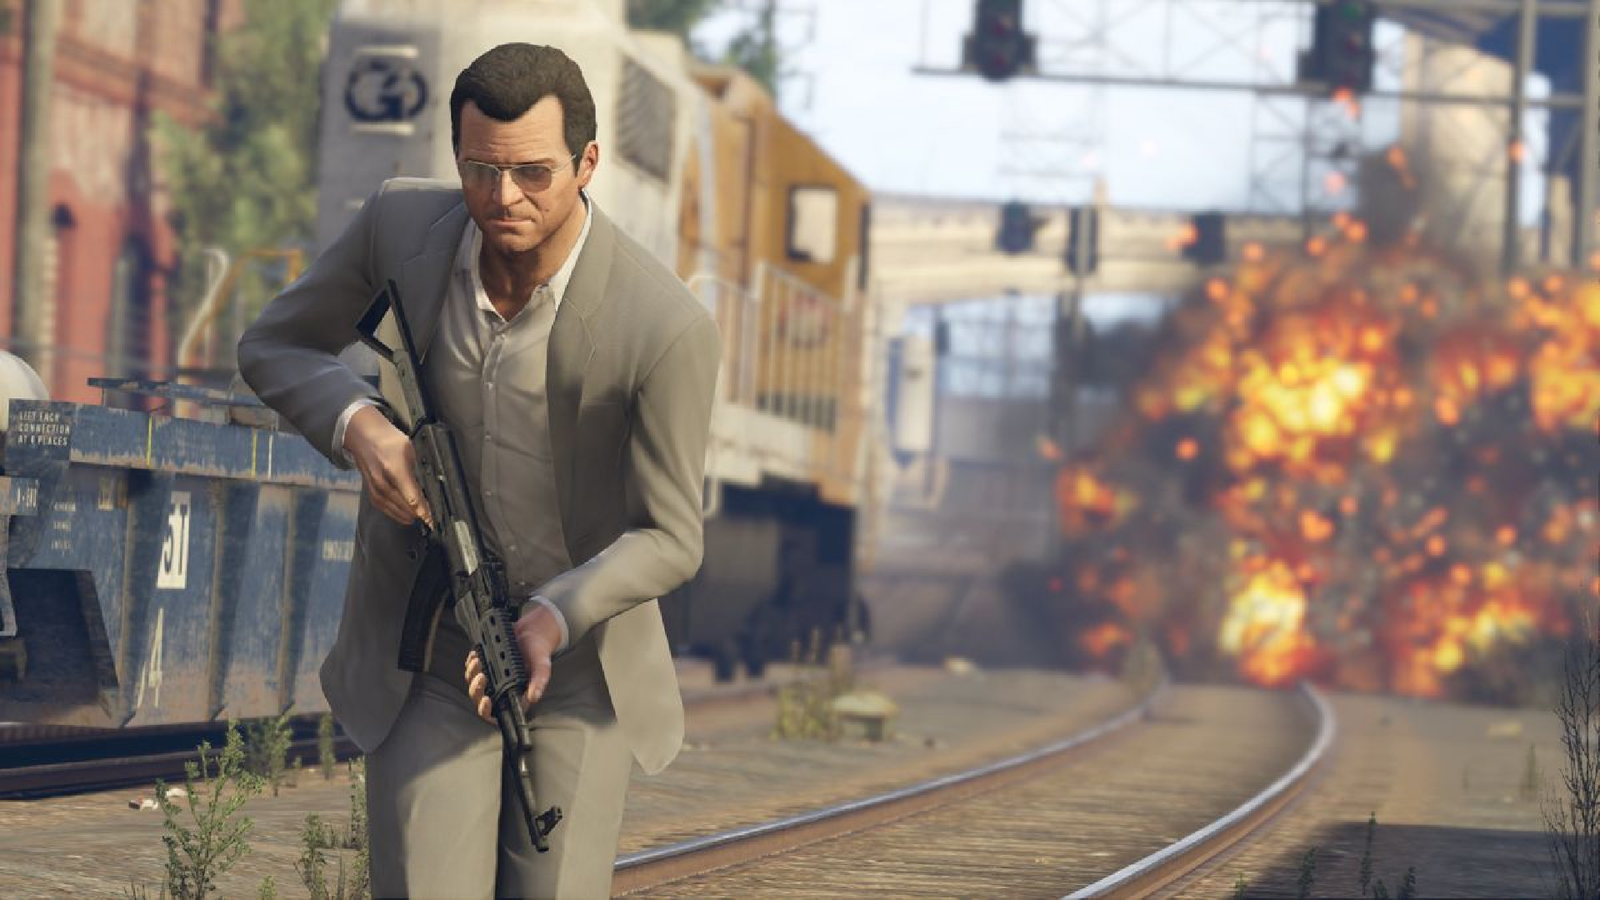 Grand Theft Auto VI (GTA 6) Trailer Released Early! Watch!